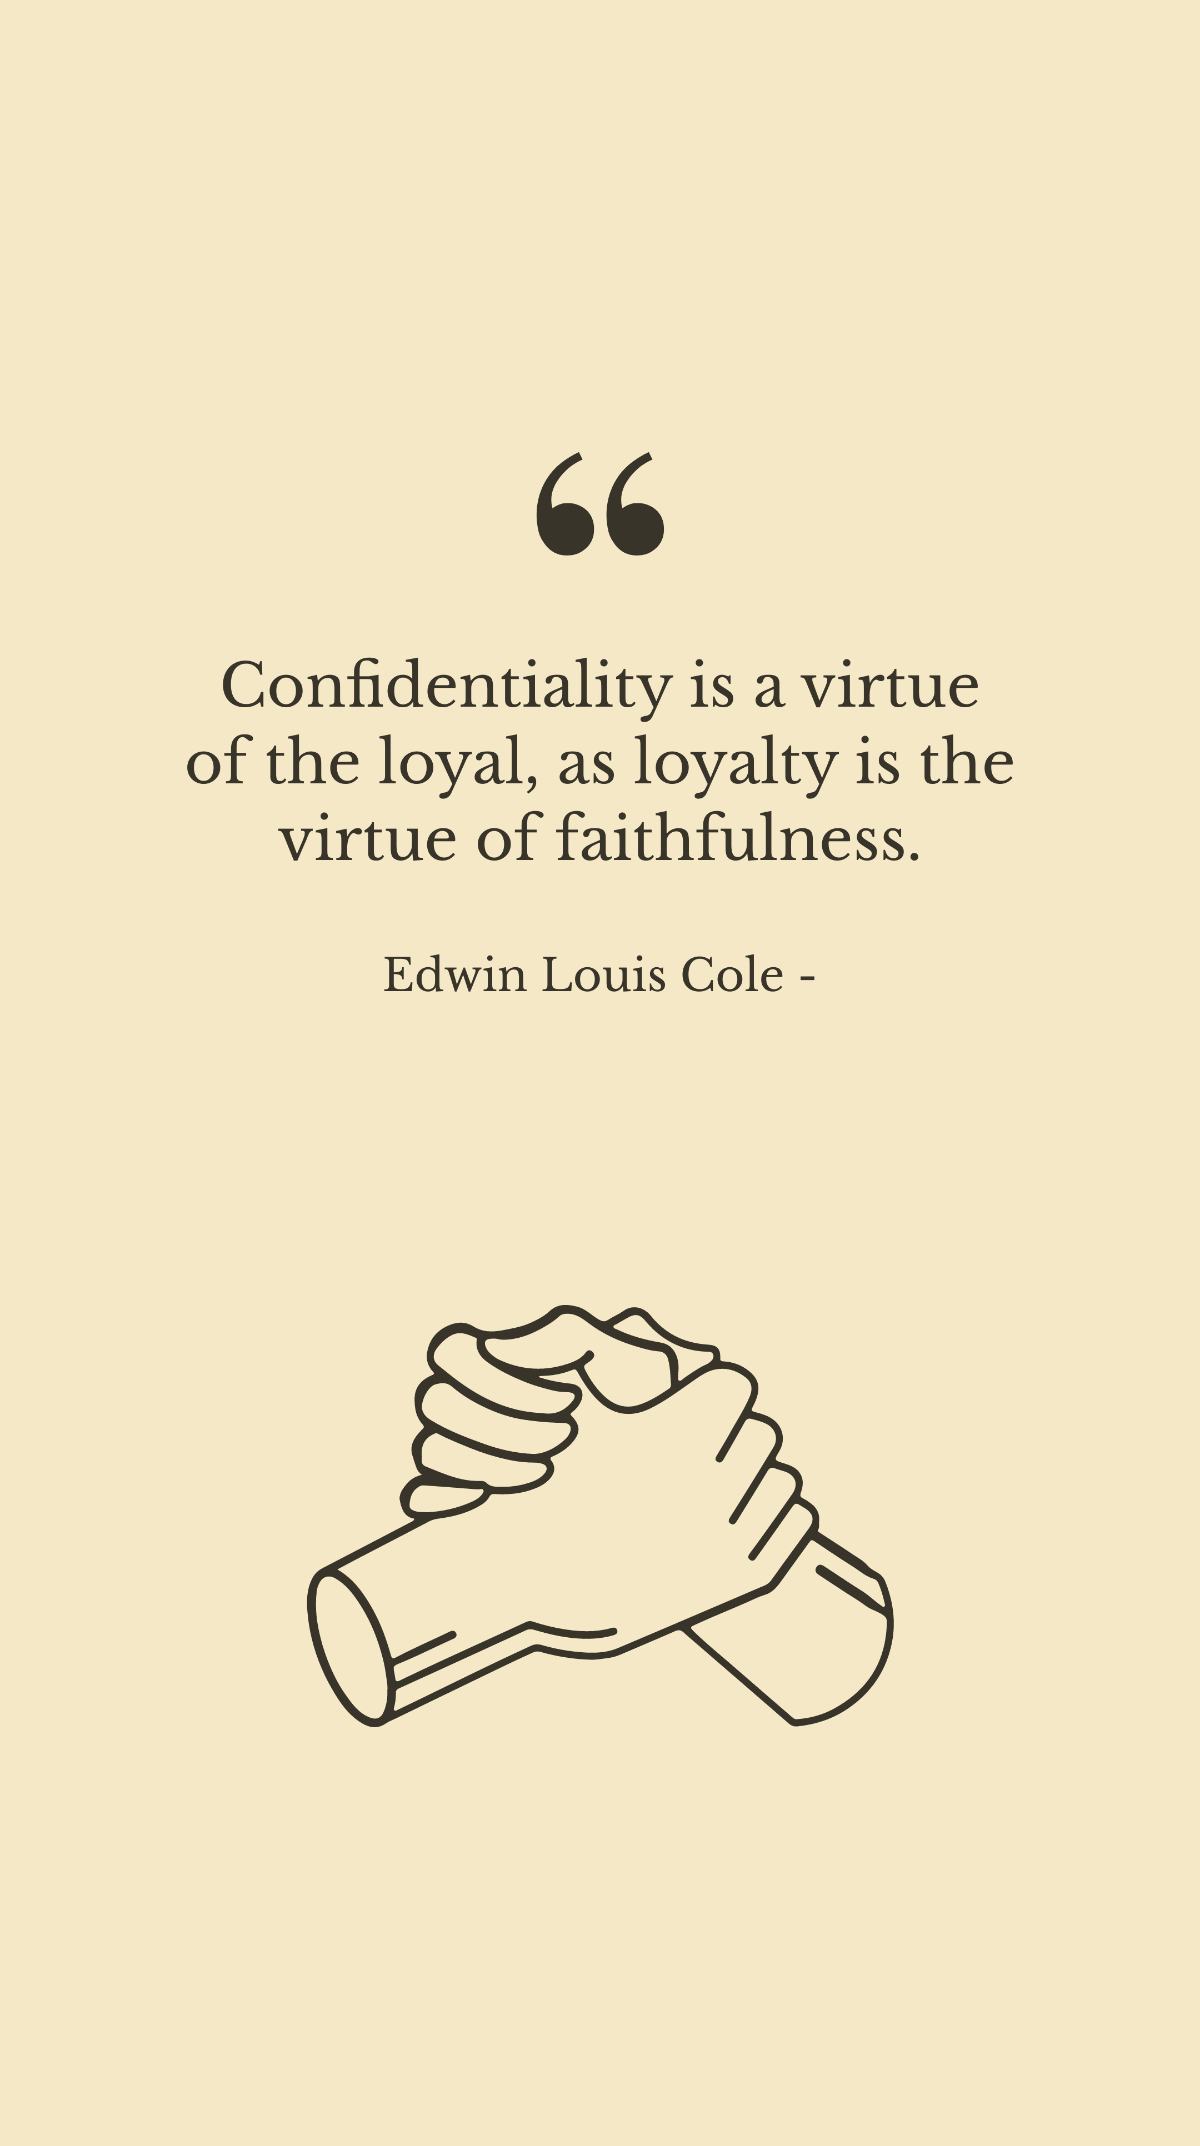 Free Edwin Louis Cole - Confidentiality is a virtue of the loyal, as loyalty is the virtue of faithfulness. Template